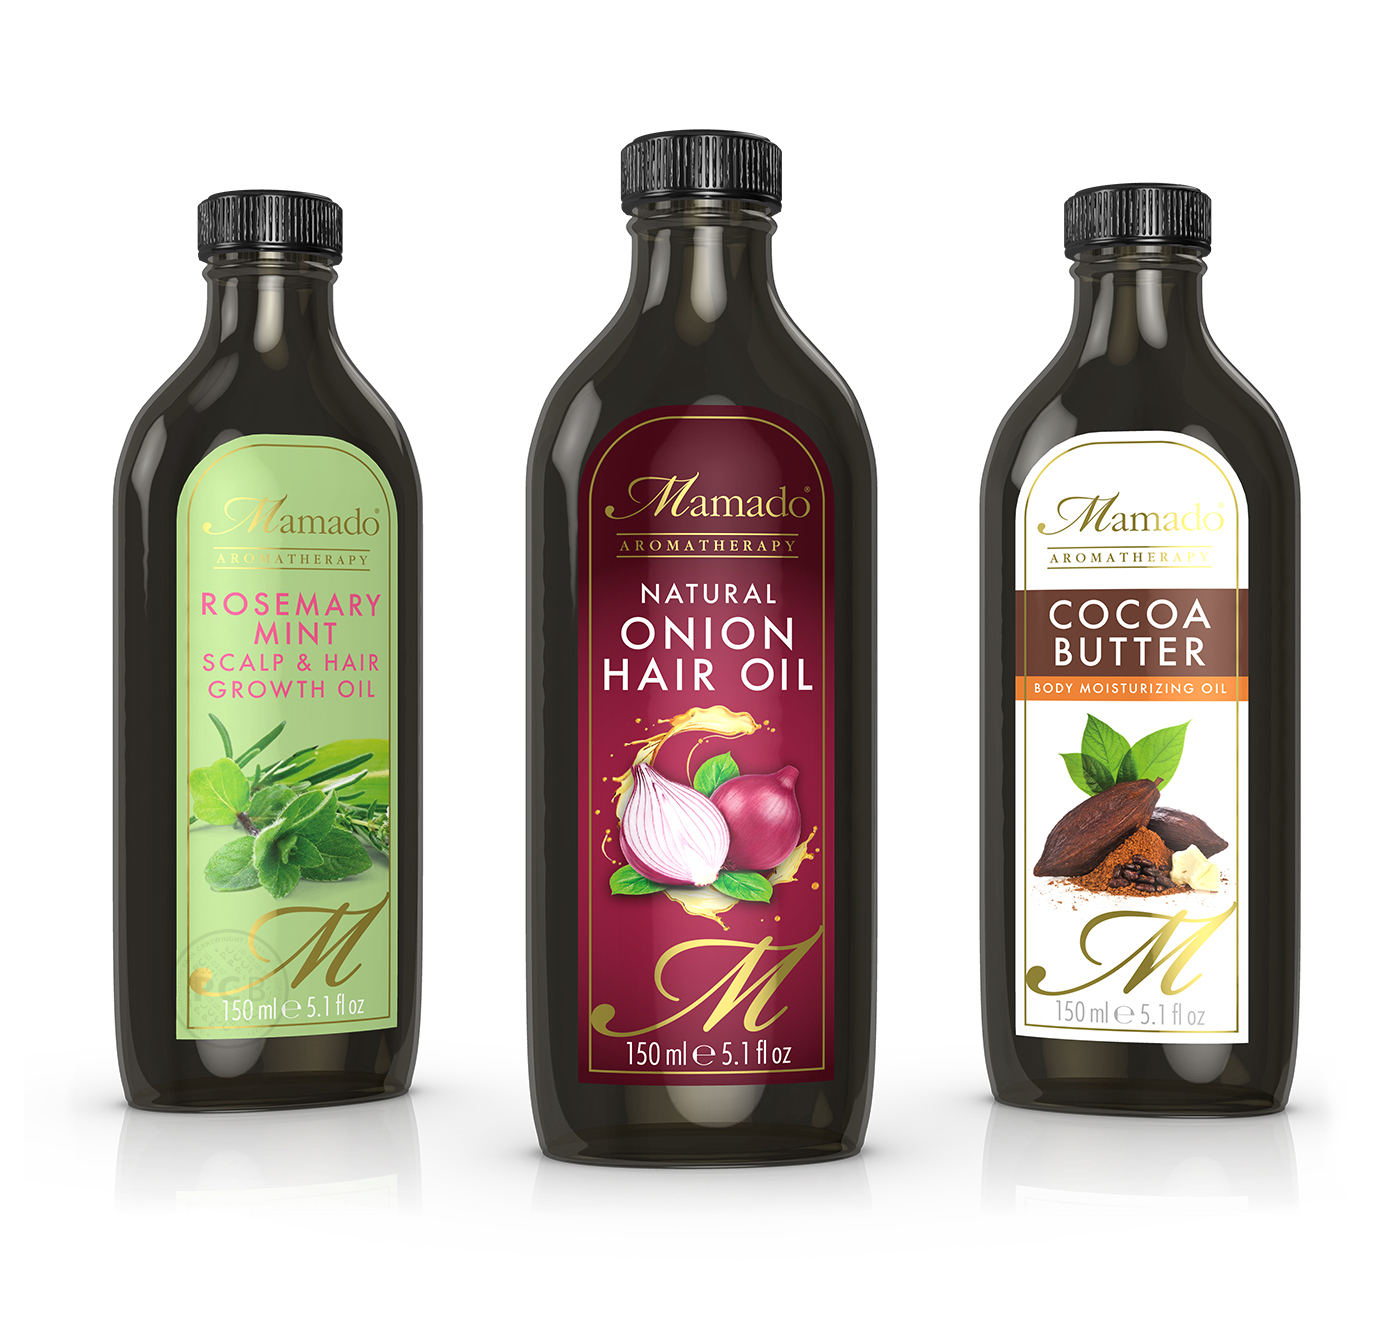 Image of three bottles of essential oil products with label graphics design by Paul Cartwright Branding.